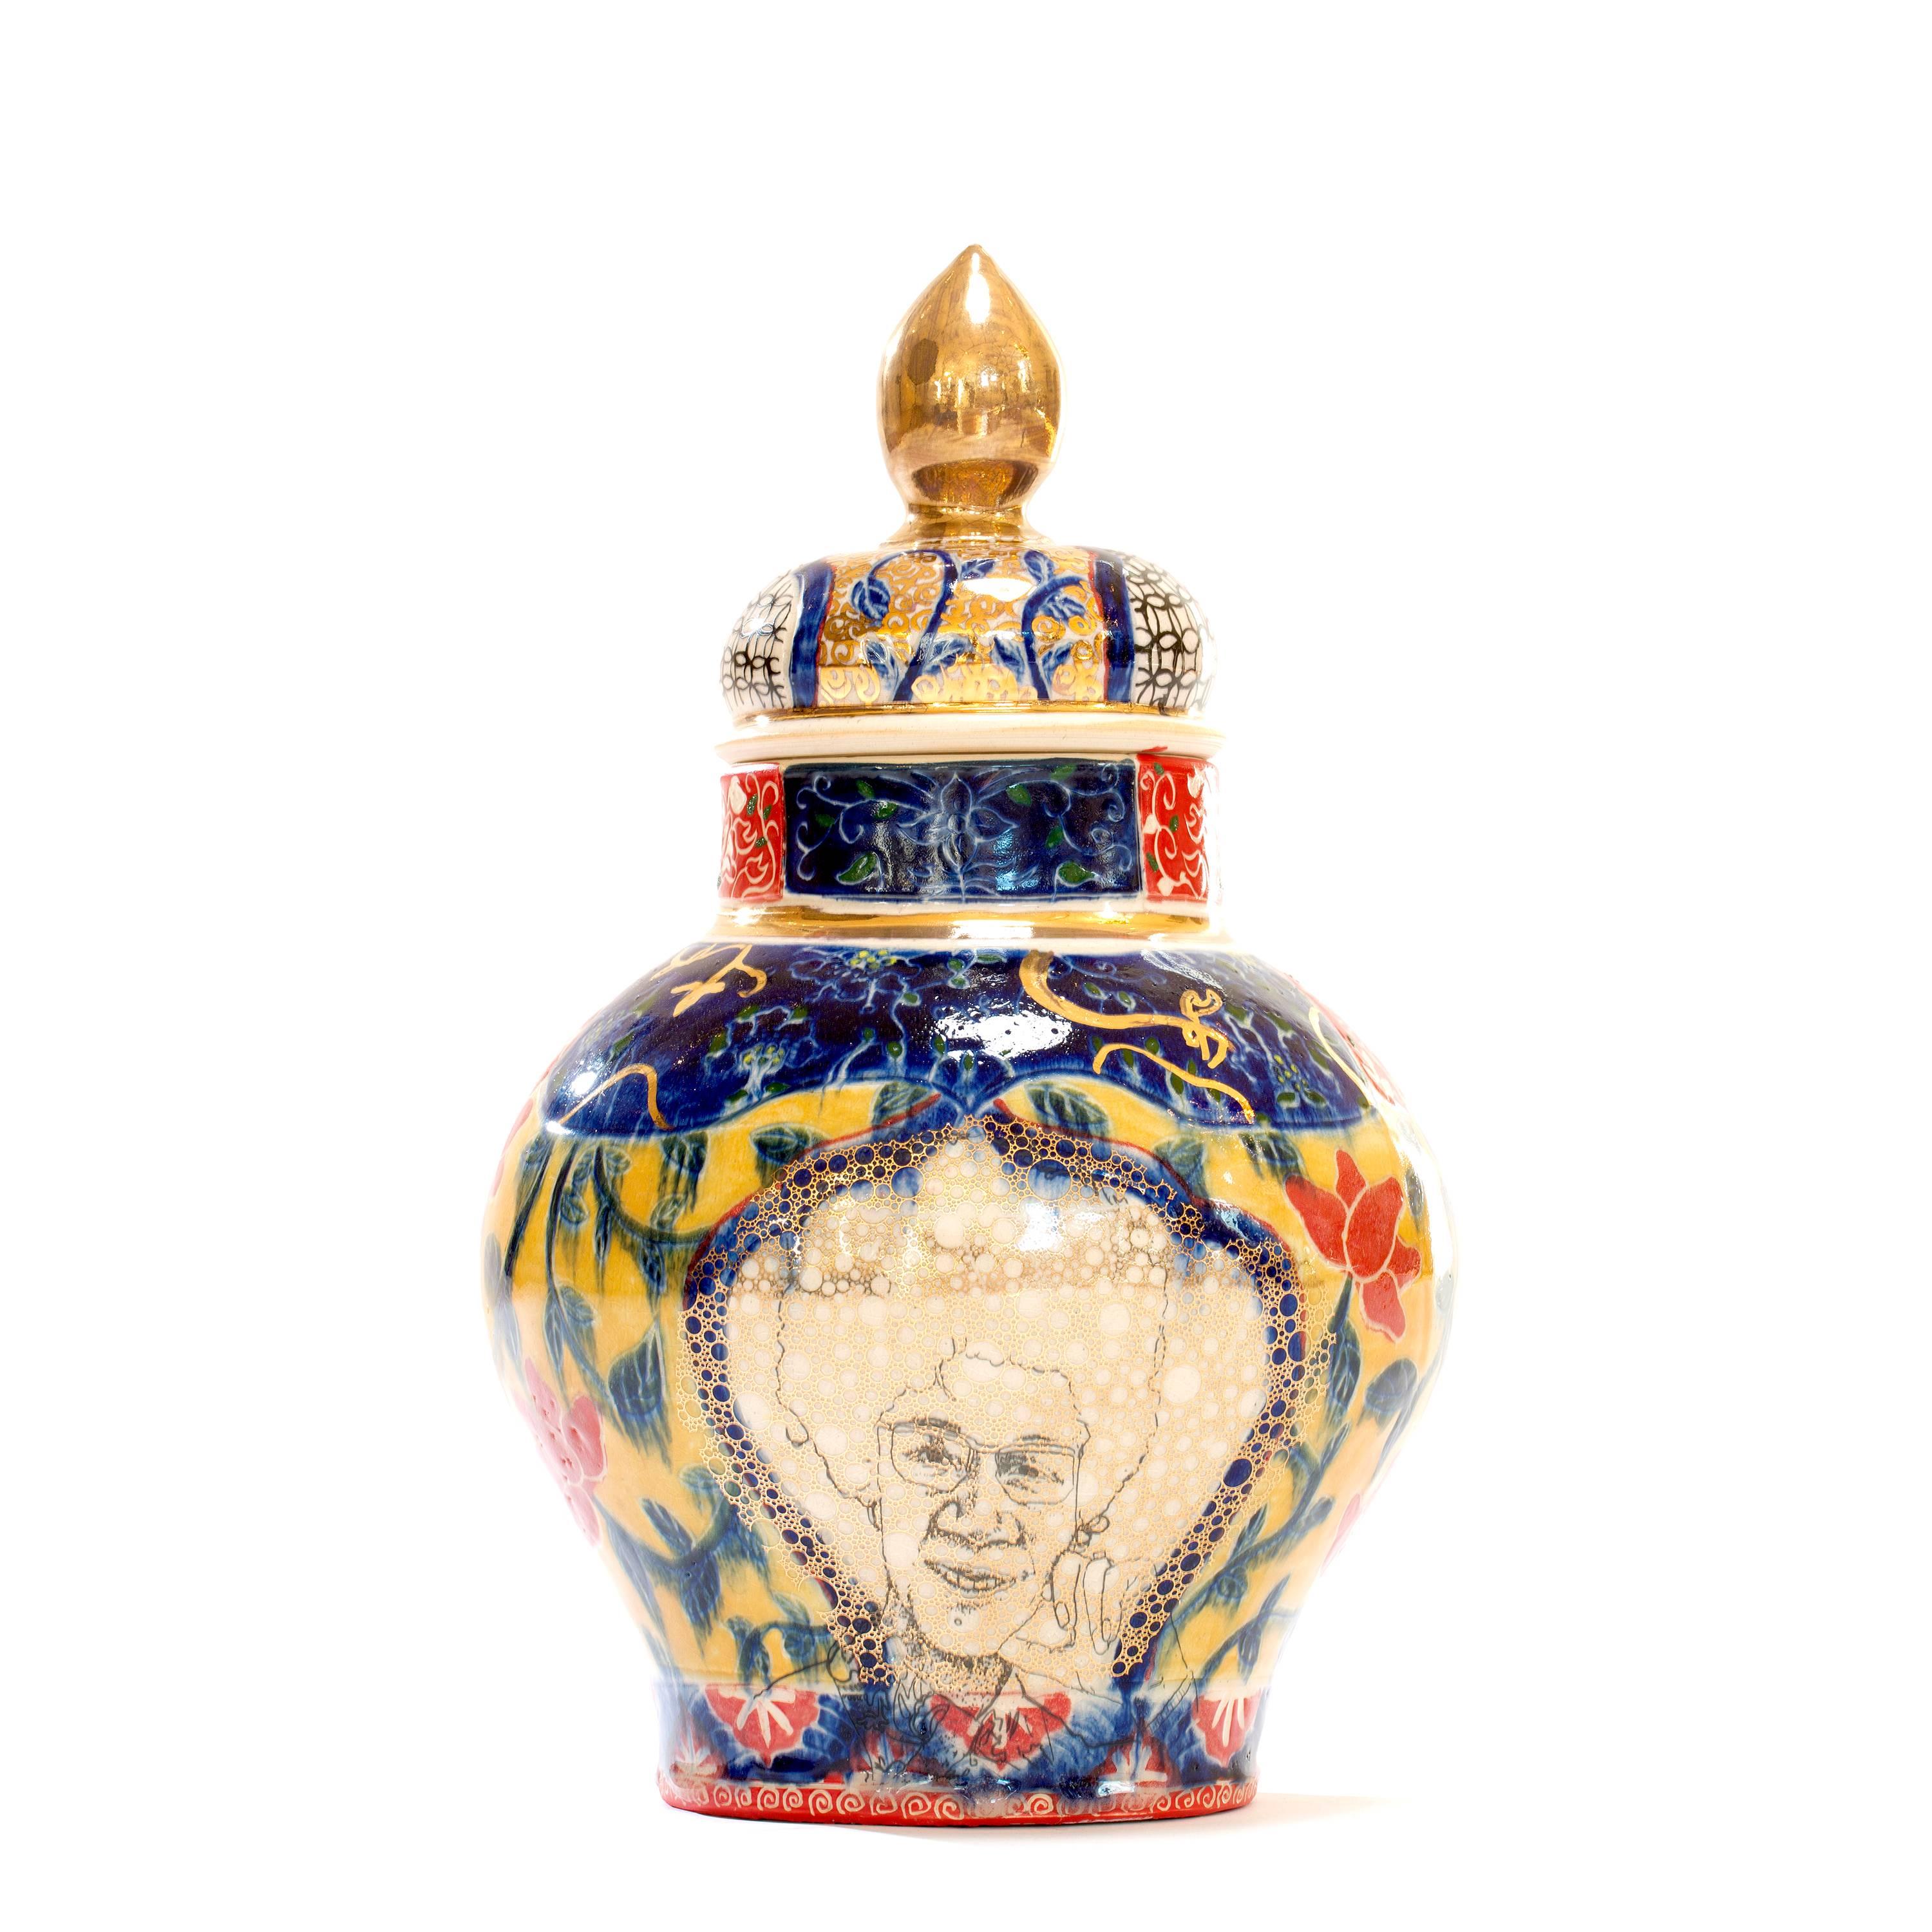 Whitney Houston / Shirley Chisholm Urn is made by Roberto Lugo out of porcelain, china paint and gold luster.

Best known for expertly thrown ceramic vessels that are illustrated with activists, political figures, and hip-hop legends, Lugo aims to